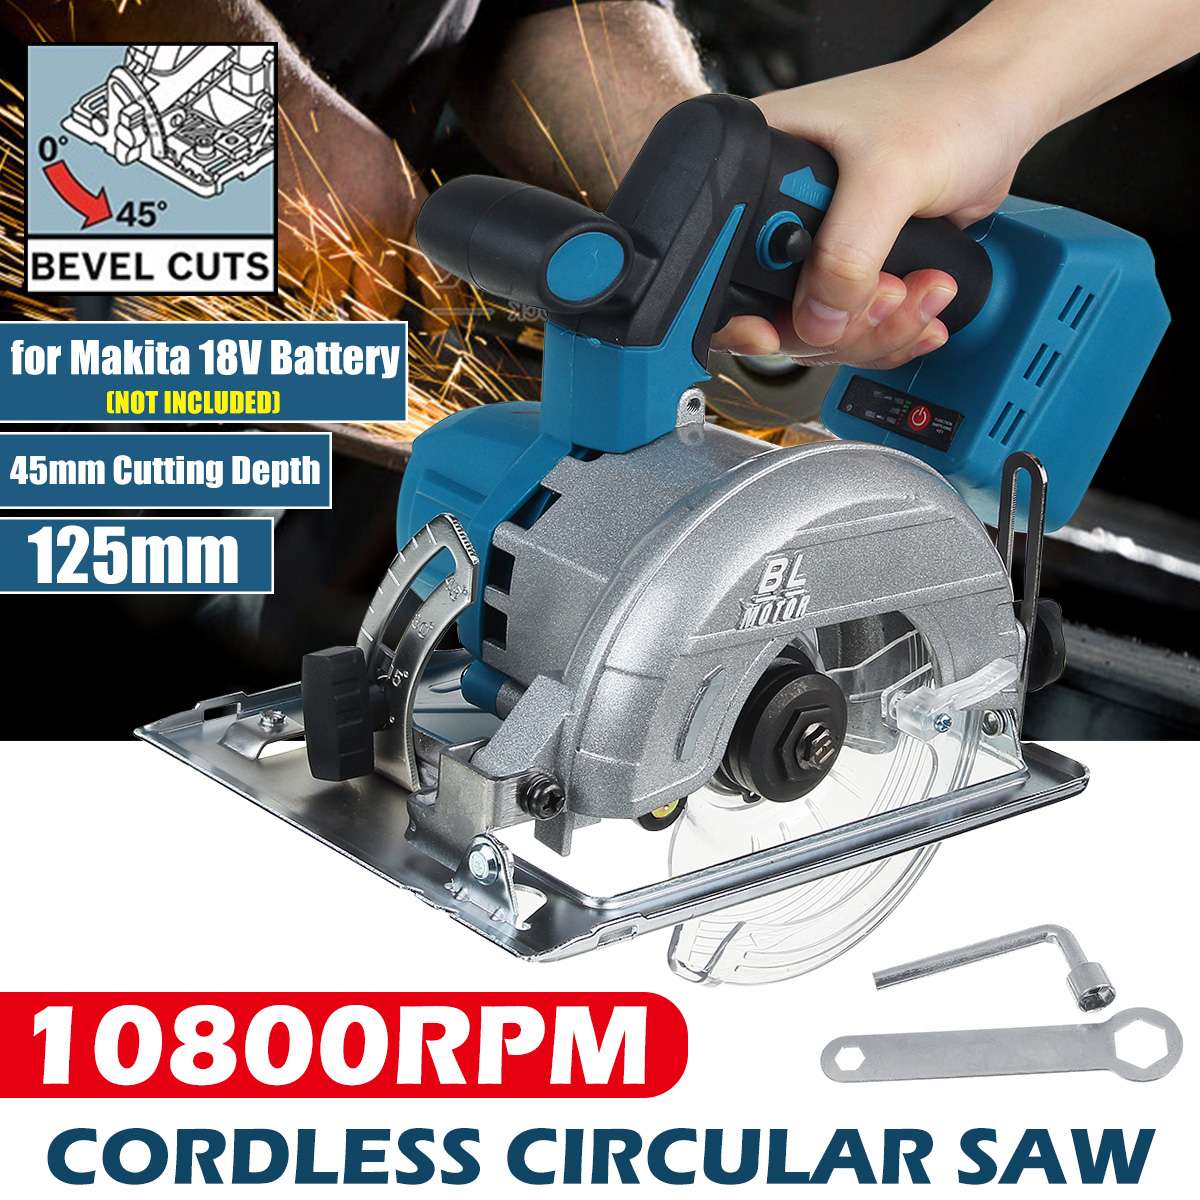 10800RPM 125mm Cordless Electric Wood Circular Saw Power Tools Dust Passage Multifunction Cutting Machine For 18V Makita Battery